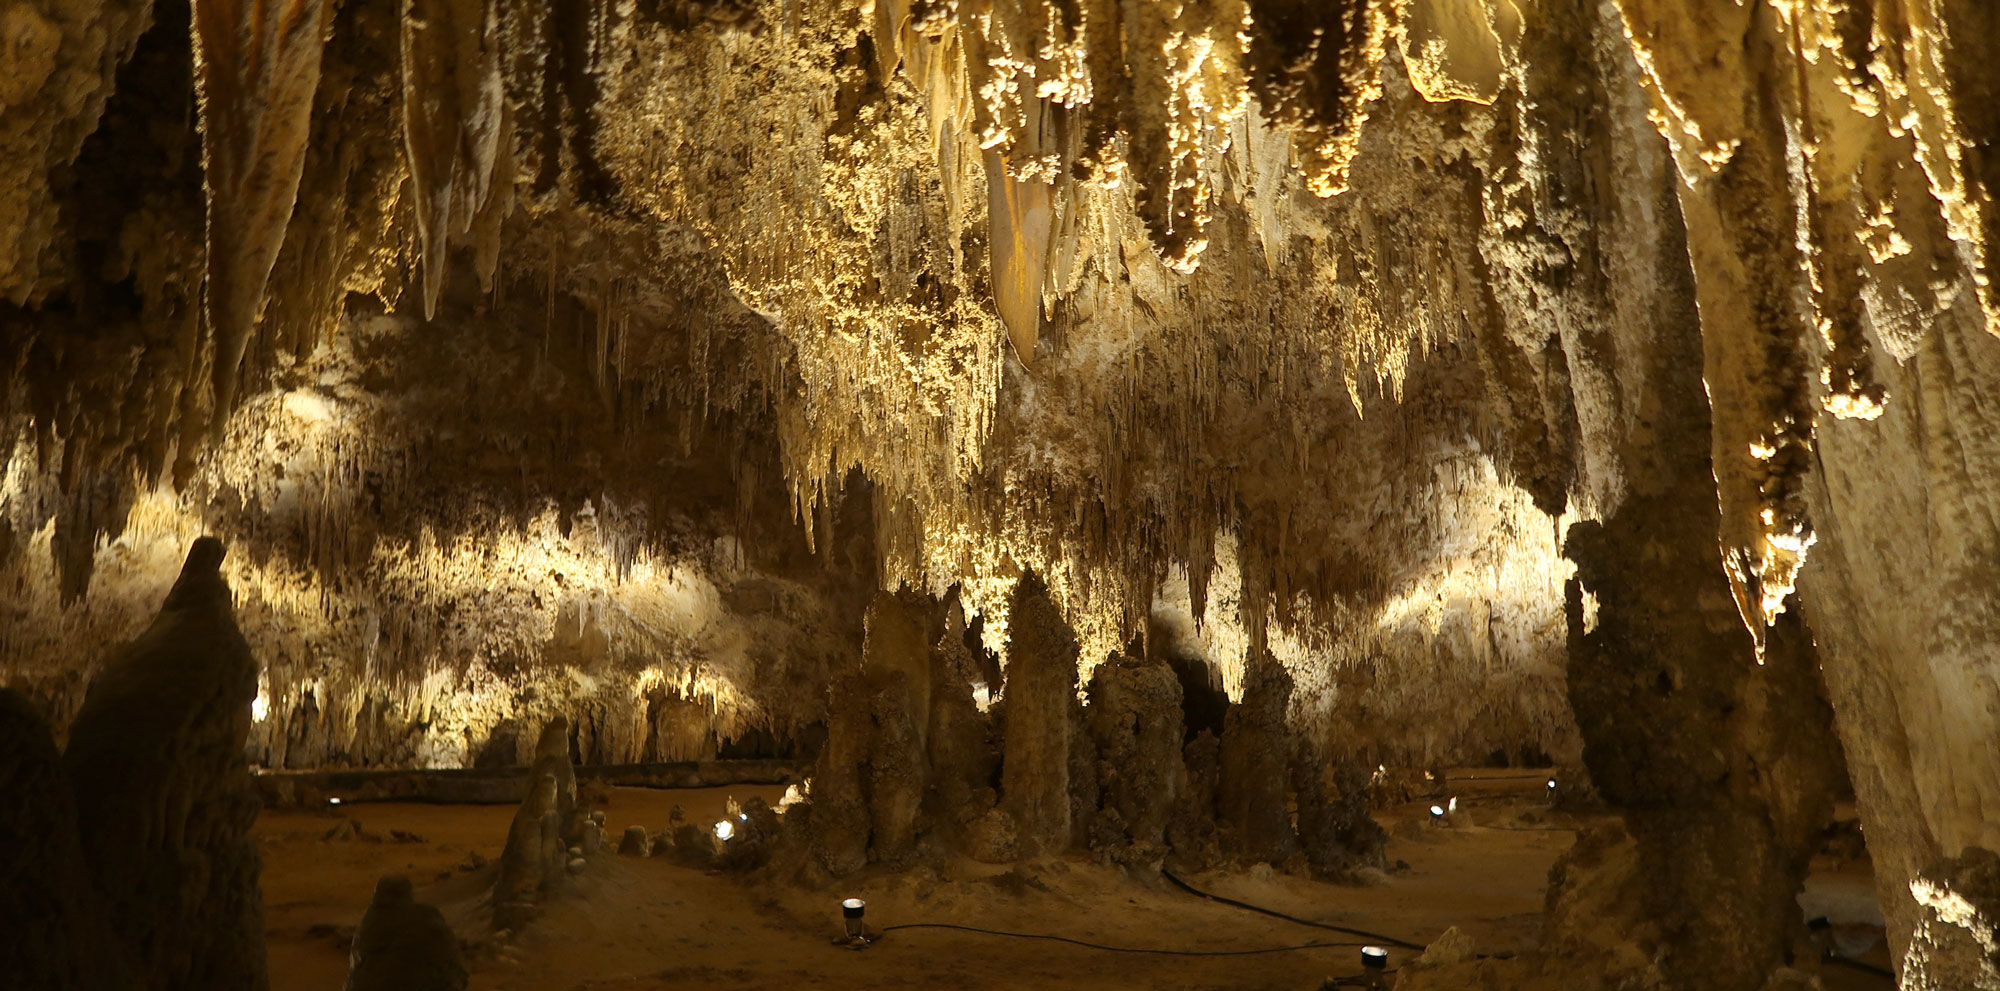 Tips for the (Amazing) Carlsbad Caverns